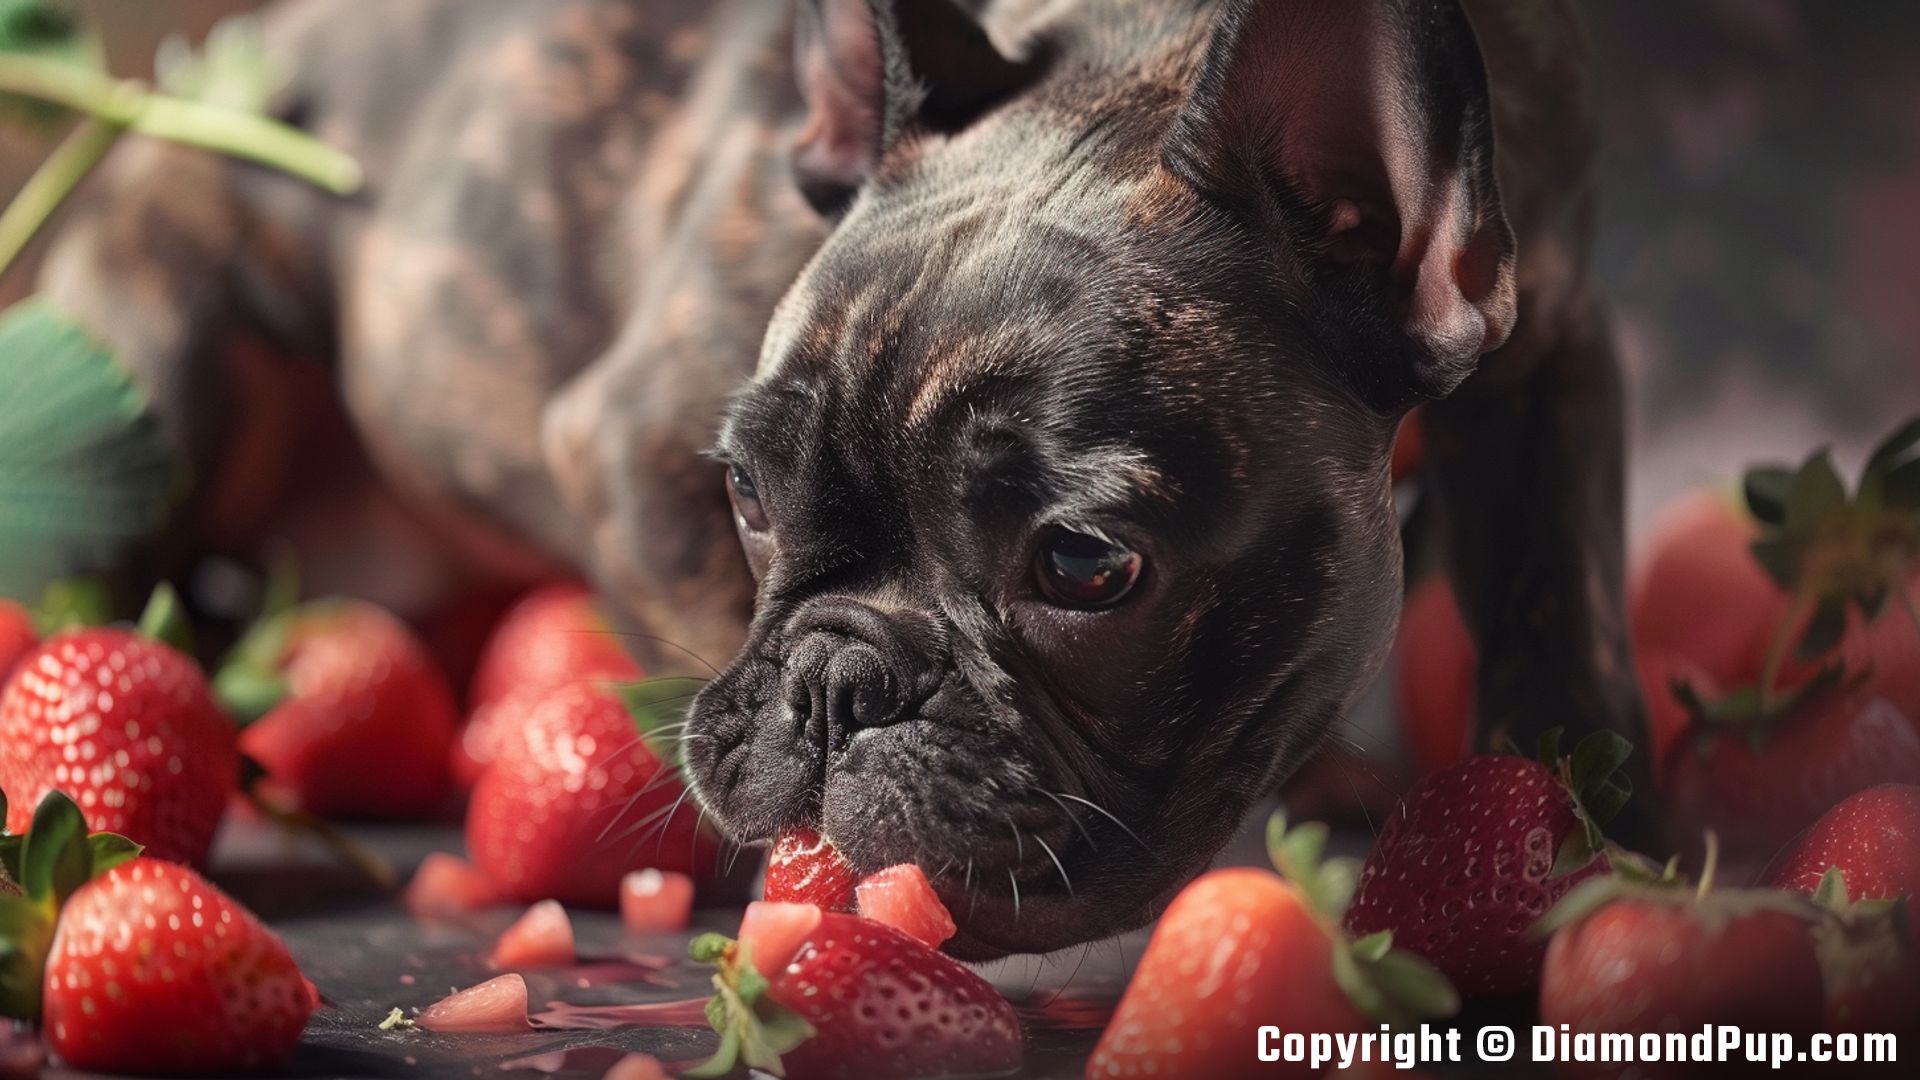 Photo of an Adorable French Bulldog Eating Strawberries